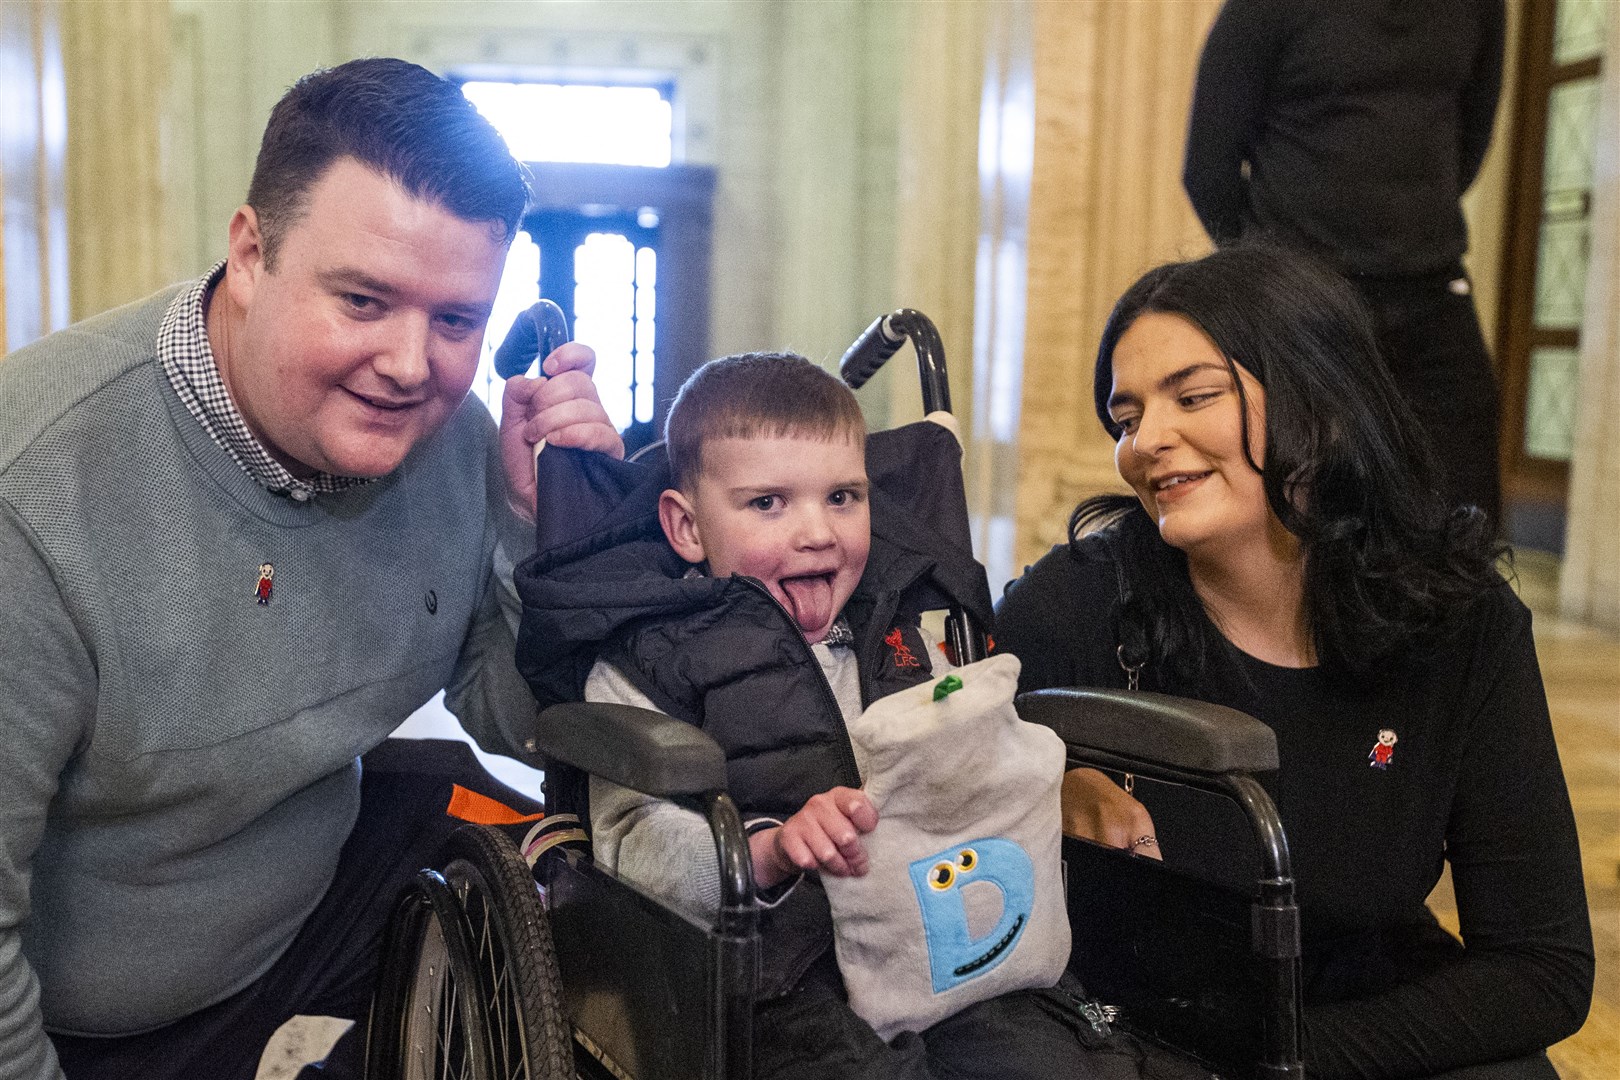 Six-year-old Daithi MacGabhann with his parents Mairtin Mac Gabhann (left) and Seph Ni Mheallain at Parliament Buildings at Stormont (Liam McBurney/PA)